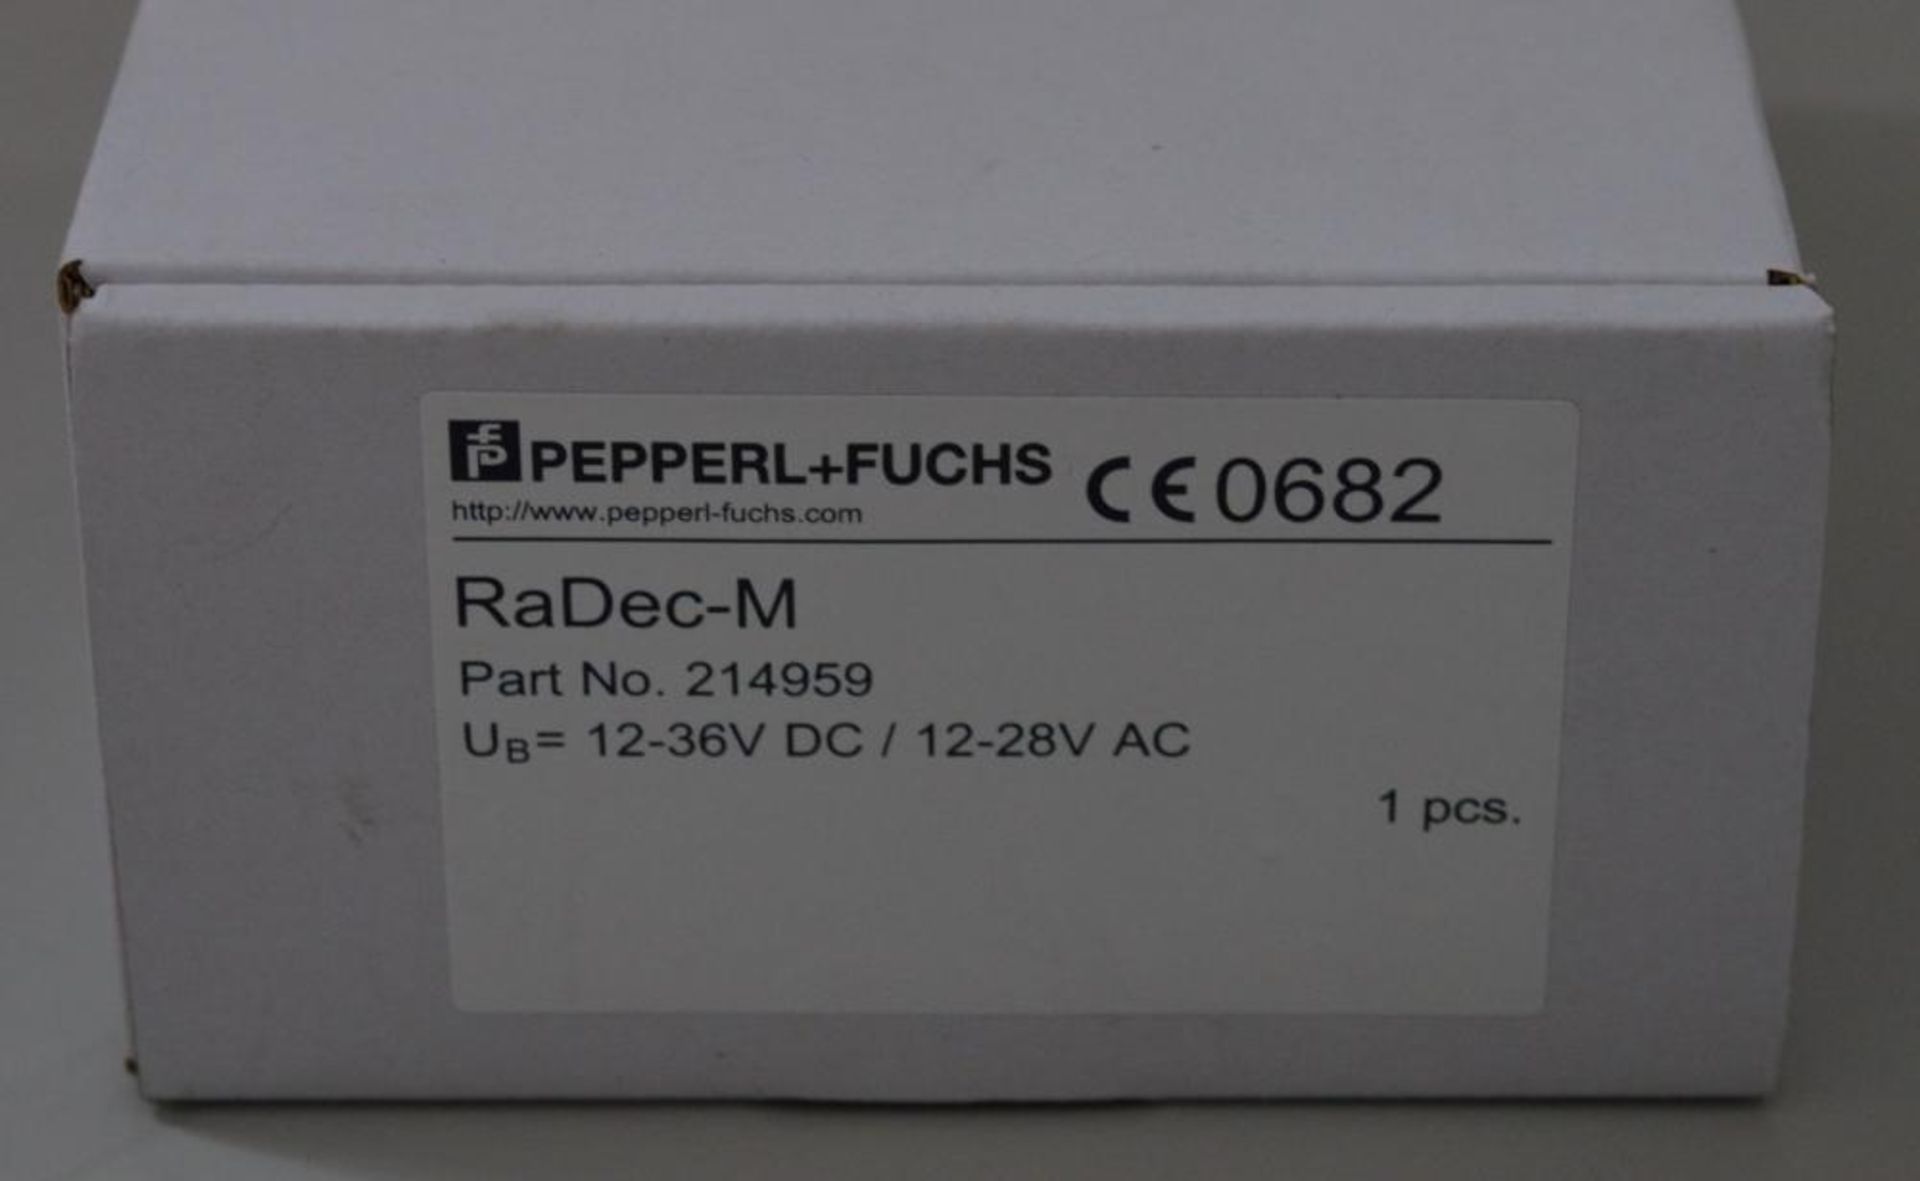 1 x Pepperl & Fuchs RaDec-M Radar Motion Detector - Suitable For Automatic Doors - 24Ghz - Image 2 of 5